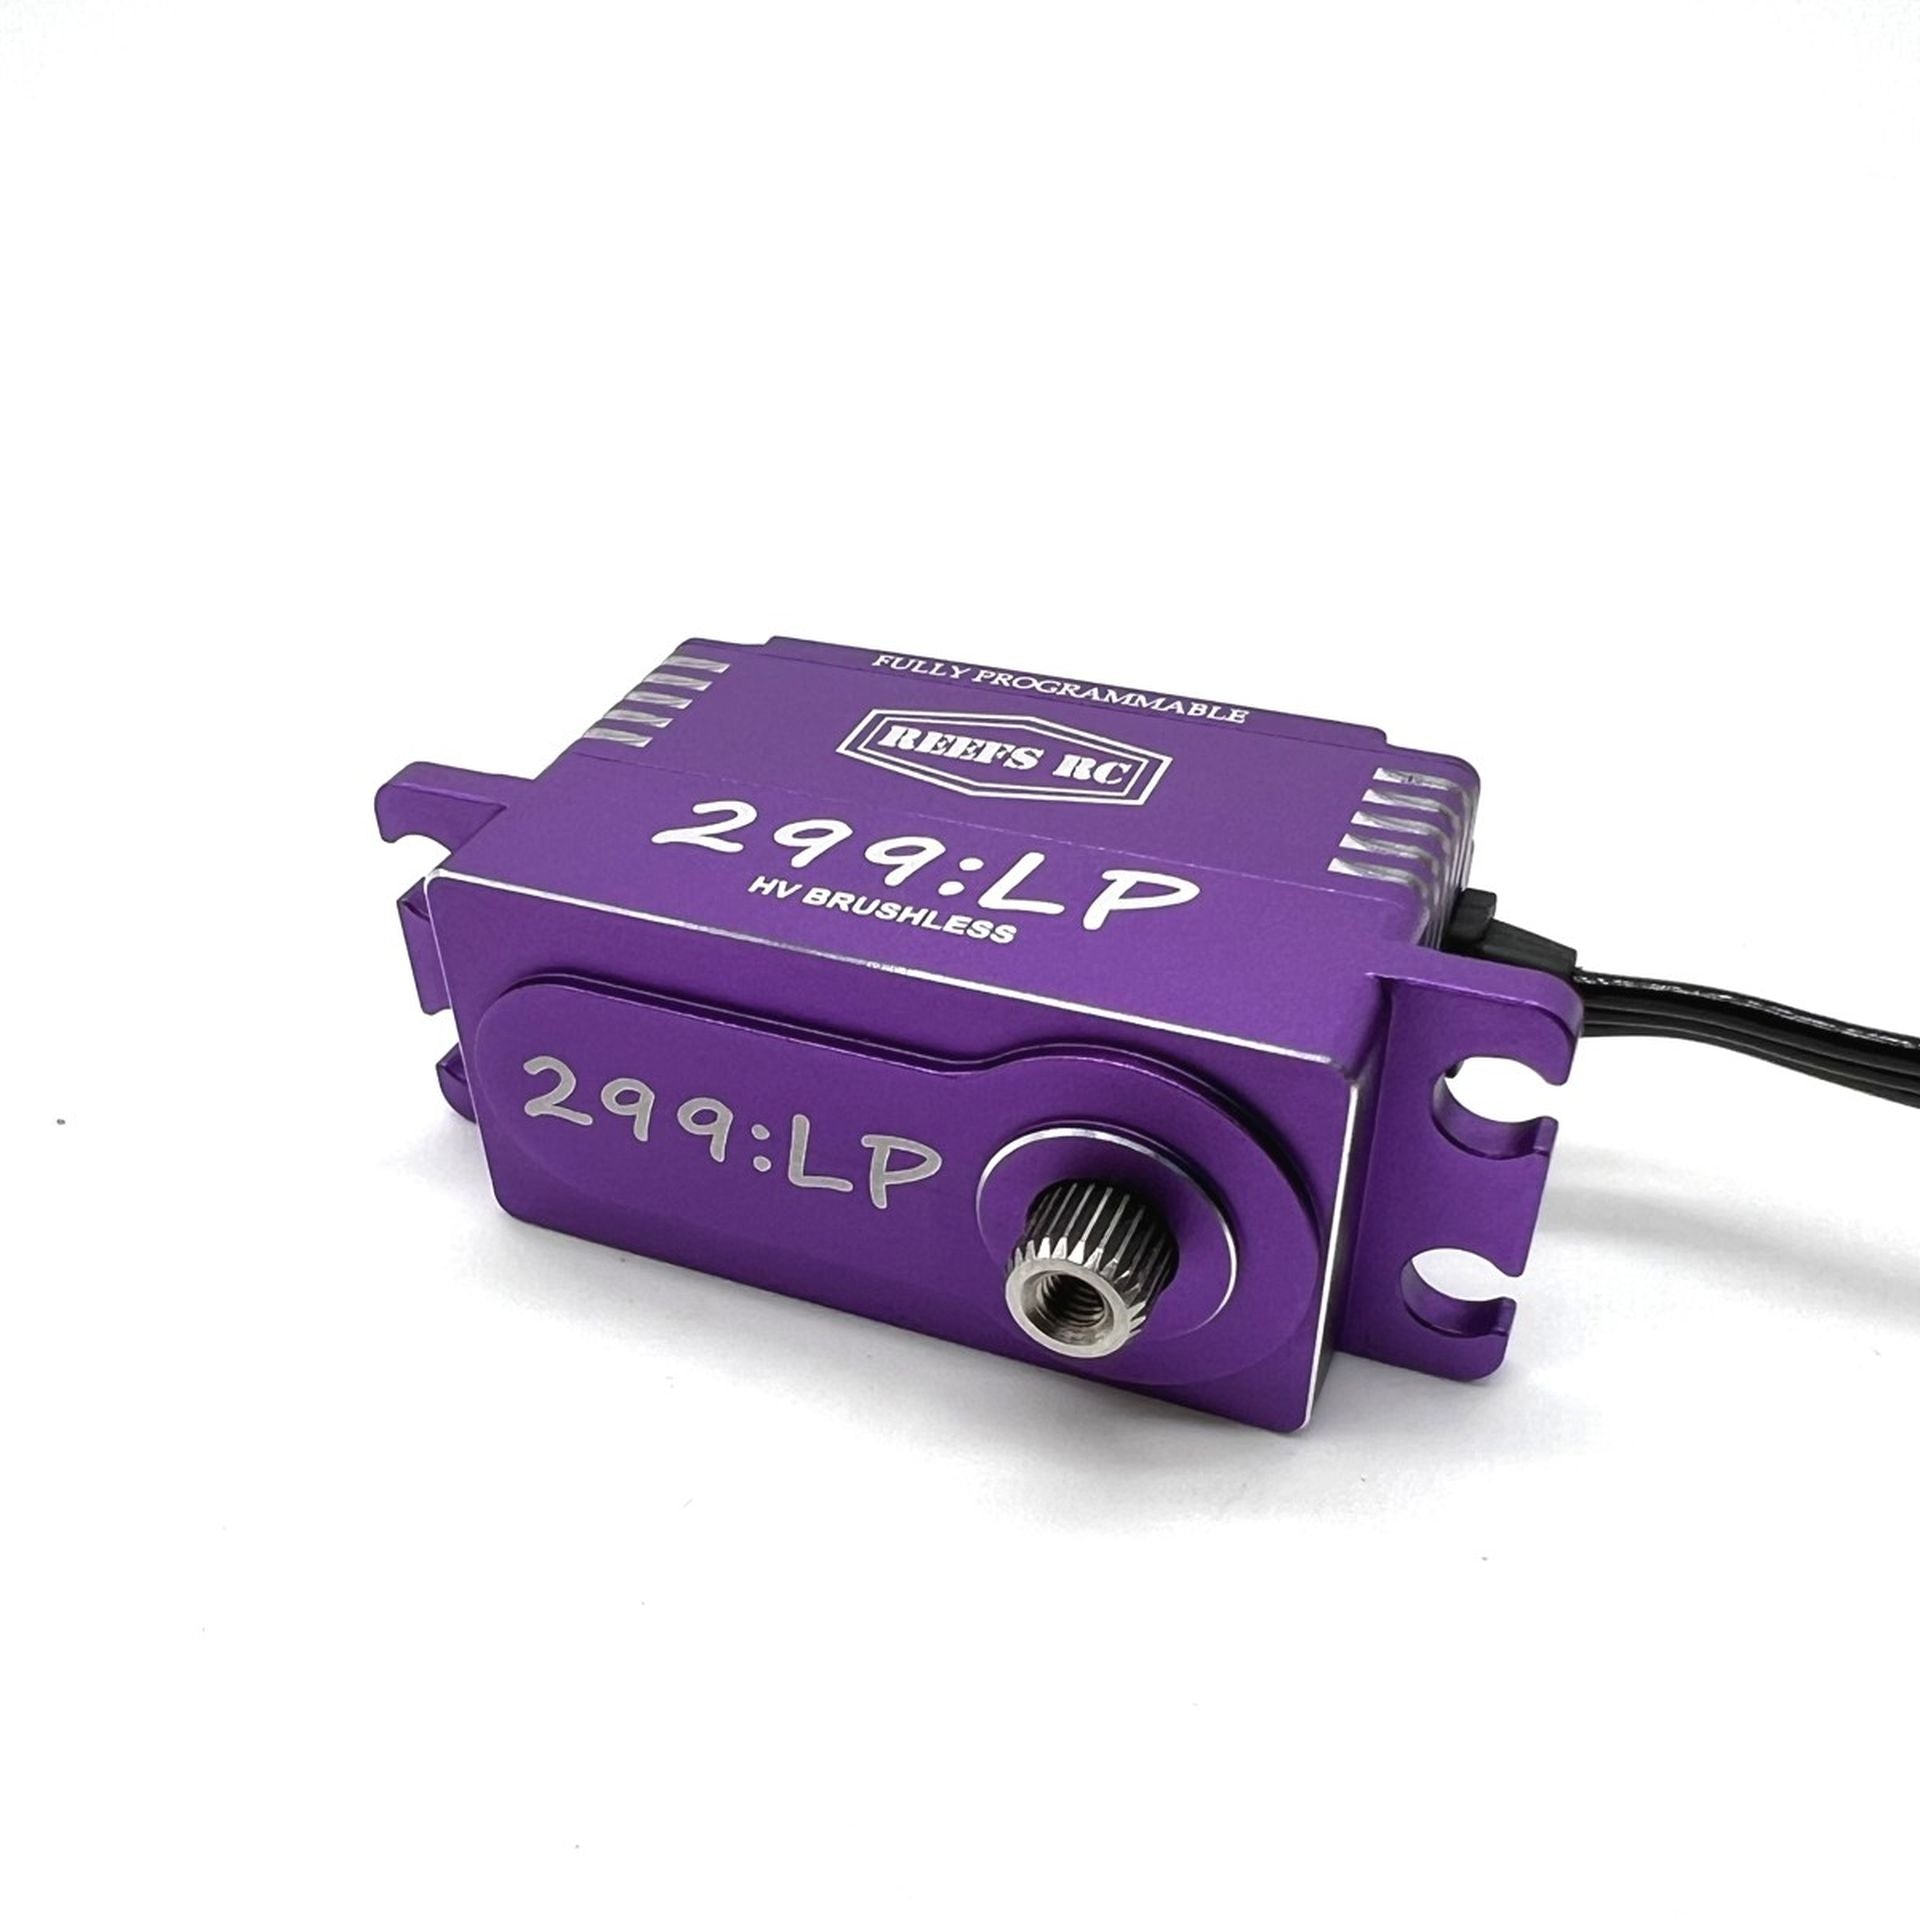 REEFS RC REEFS145 299LP Special Edition Purple High Speed High Torque Low Profile Brushless Servo .0.57/313 @ 8.4V